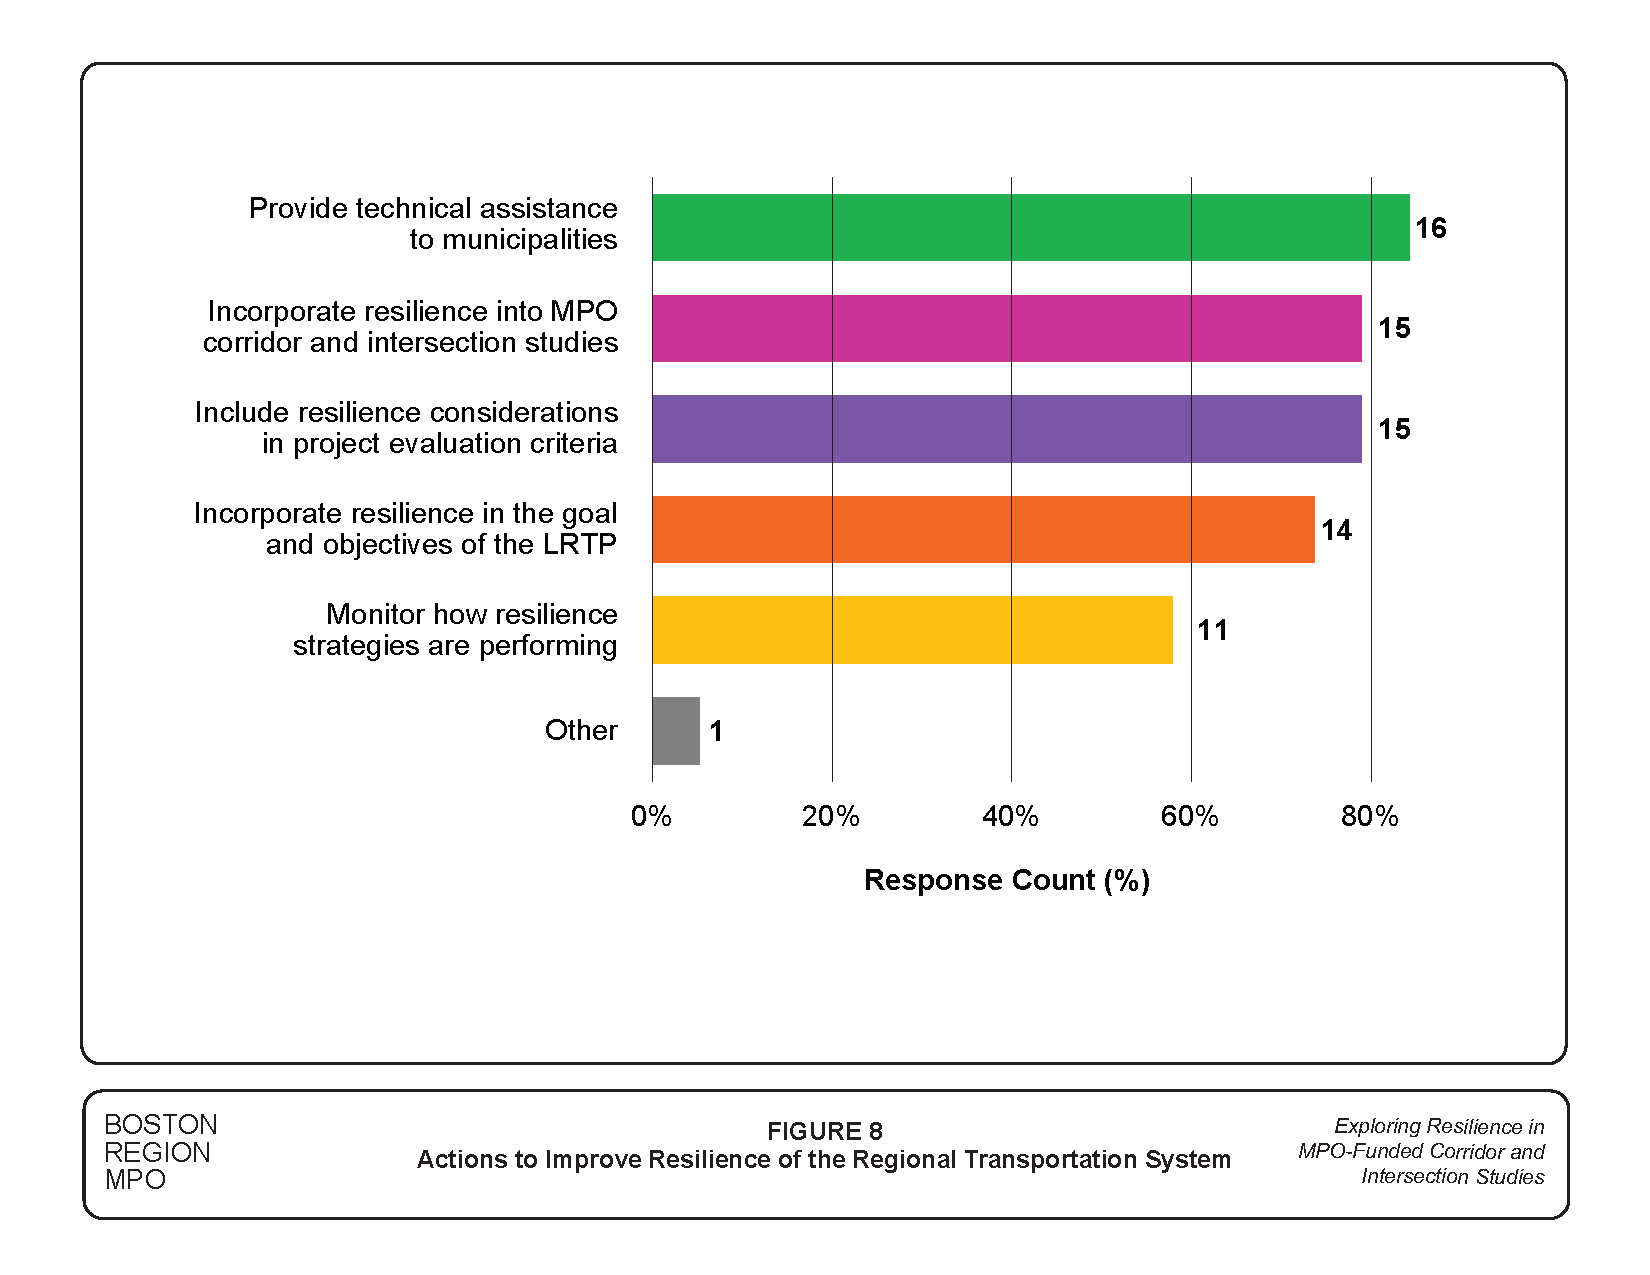 Figure 8 is a graph showing the survey results about how the Boston Region MPO can help to improve the resilience of the regional transportation system.